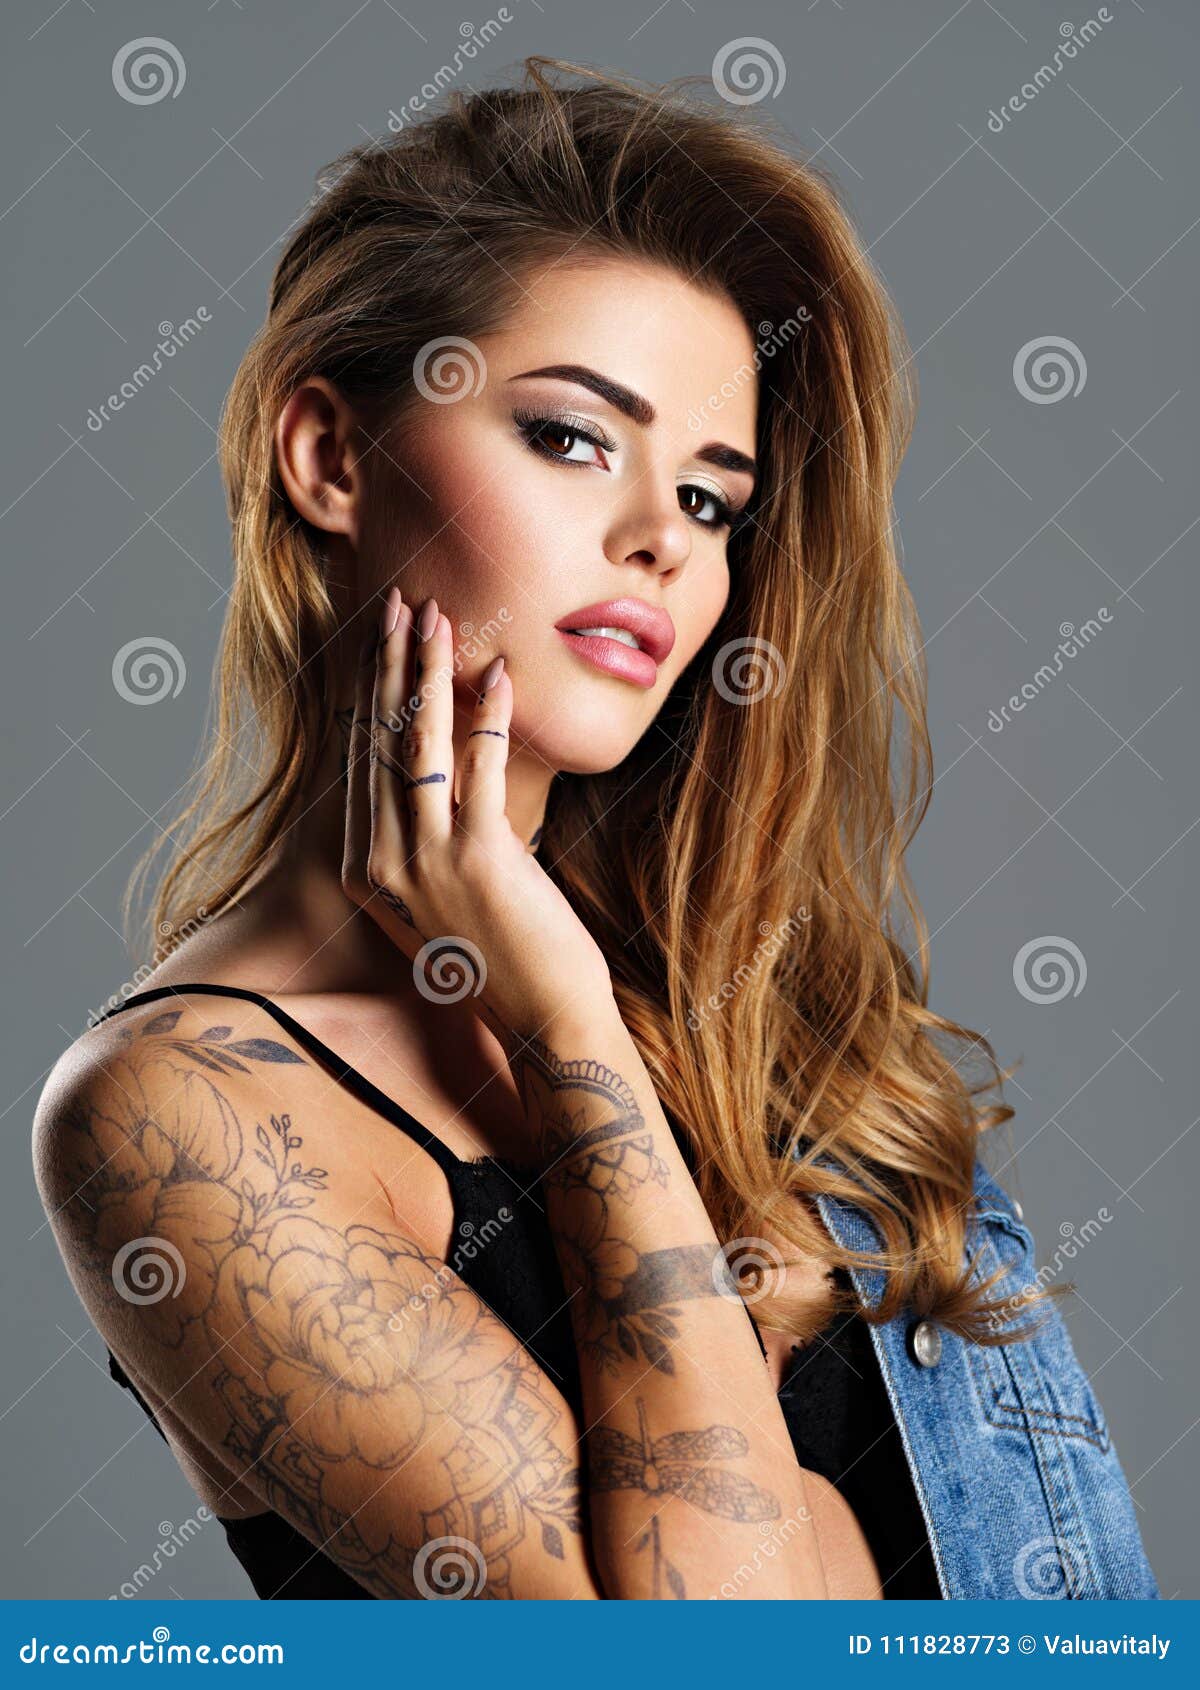 Are Tattoos Attractive on Females?